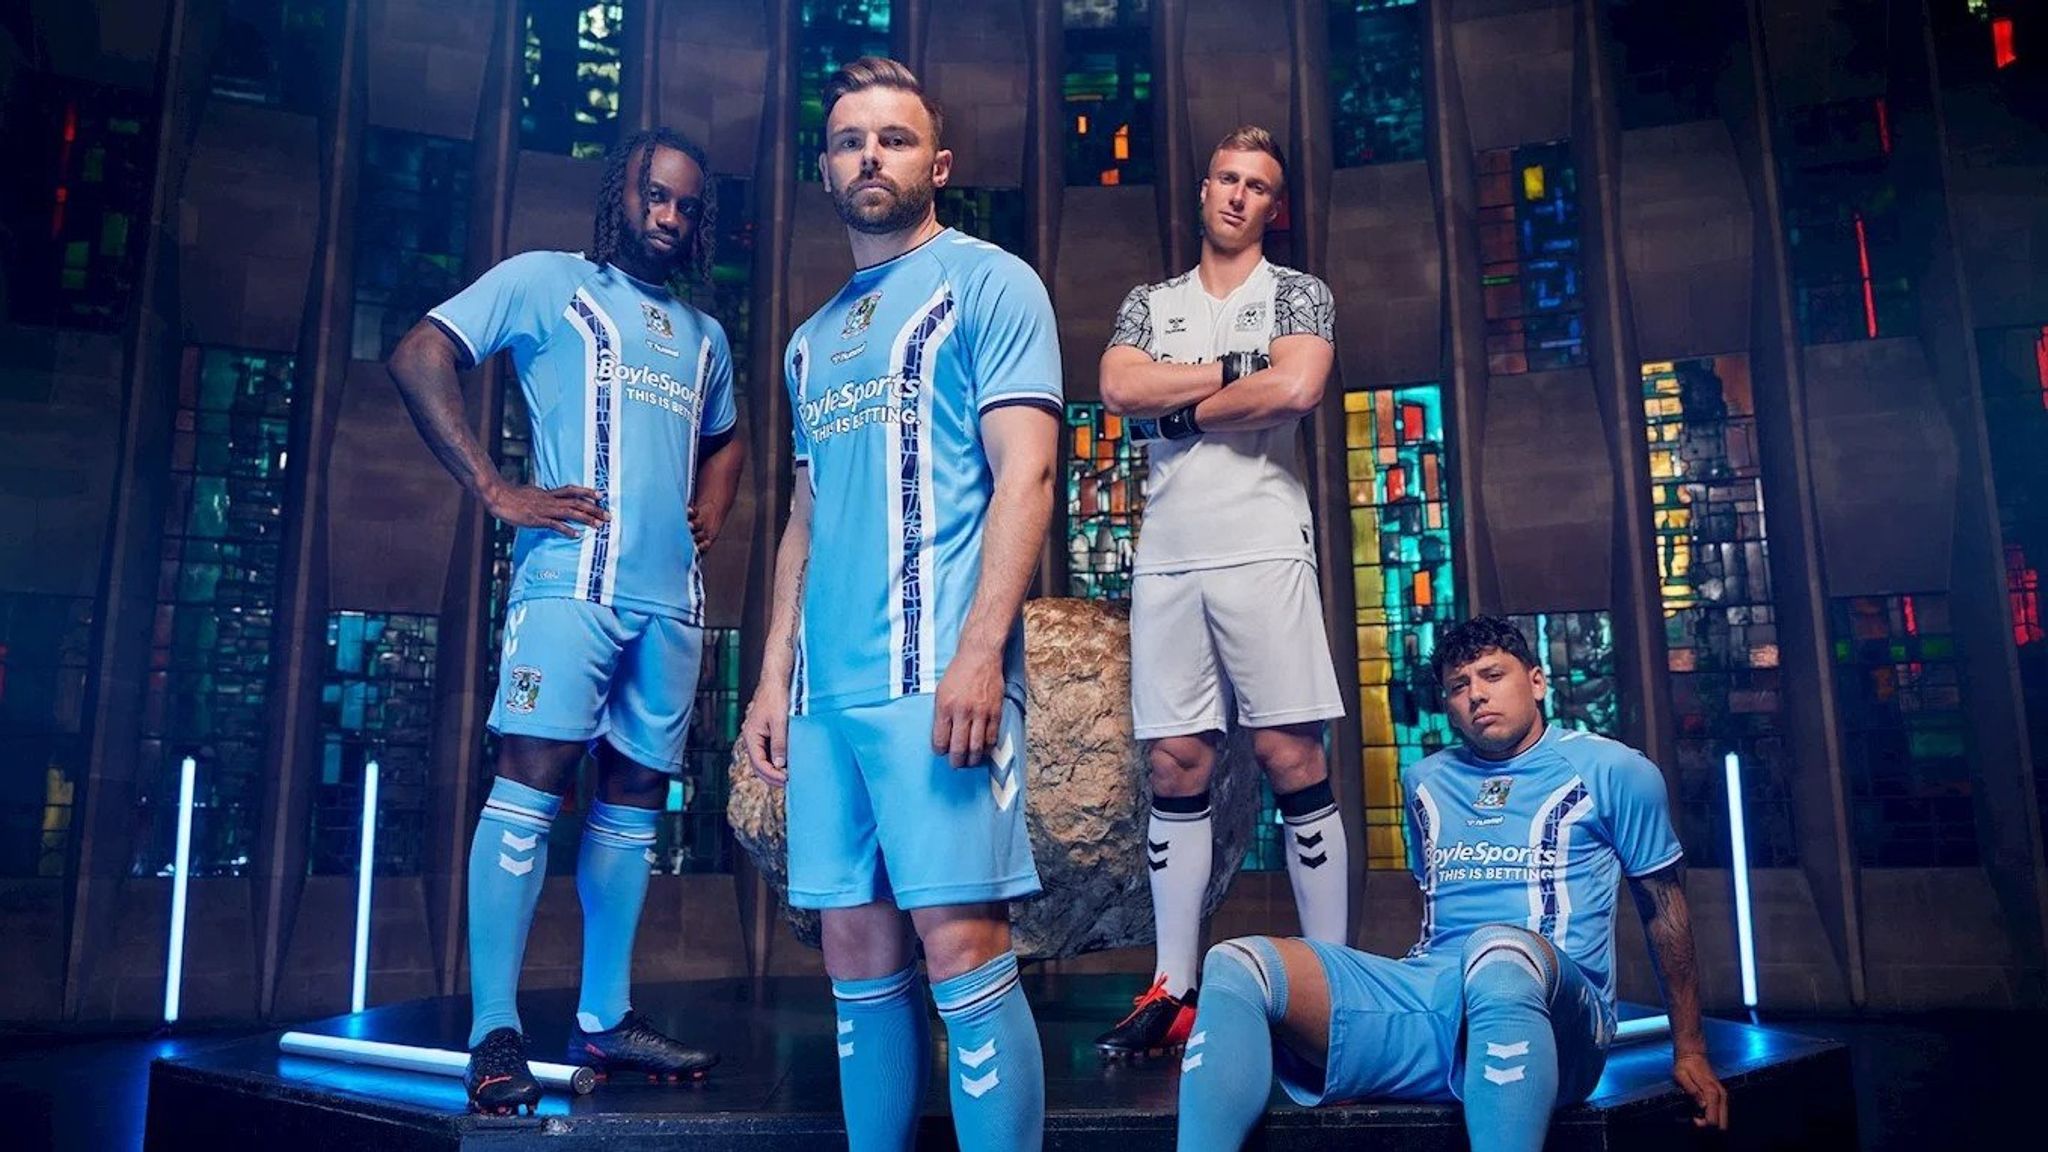 2022-23 Championship Kit Overview - All 24 Clubs - Footy Headlines